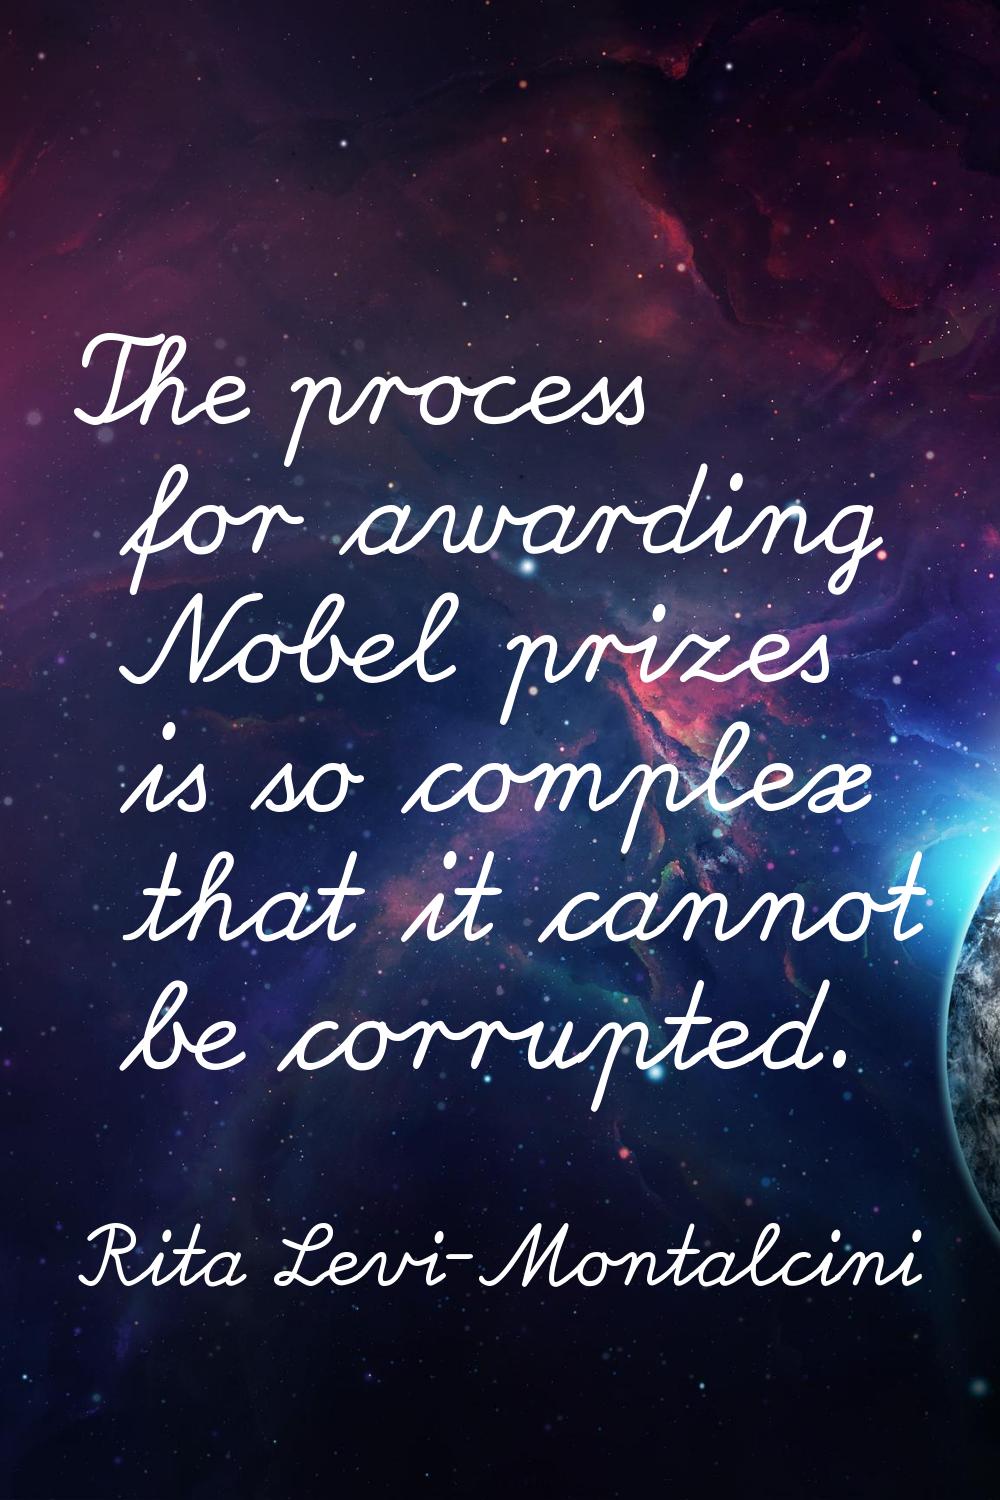 The process for awarding Nobel prizes is so complex that it cannot be corrupted.